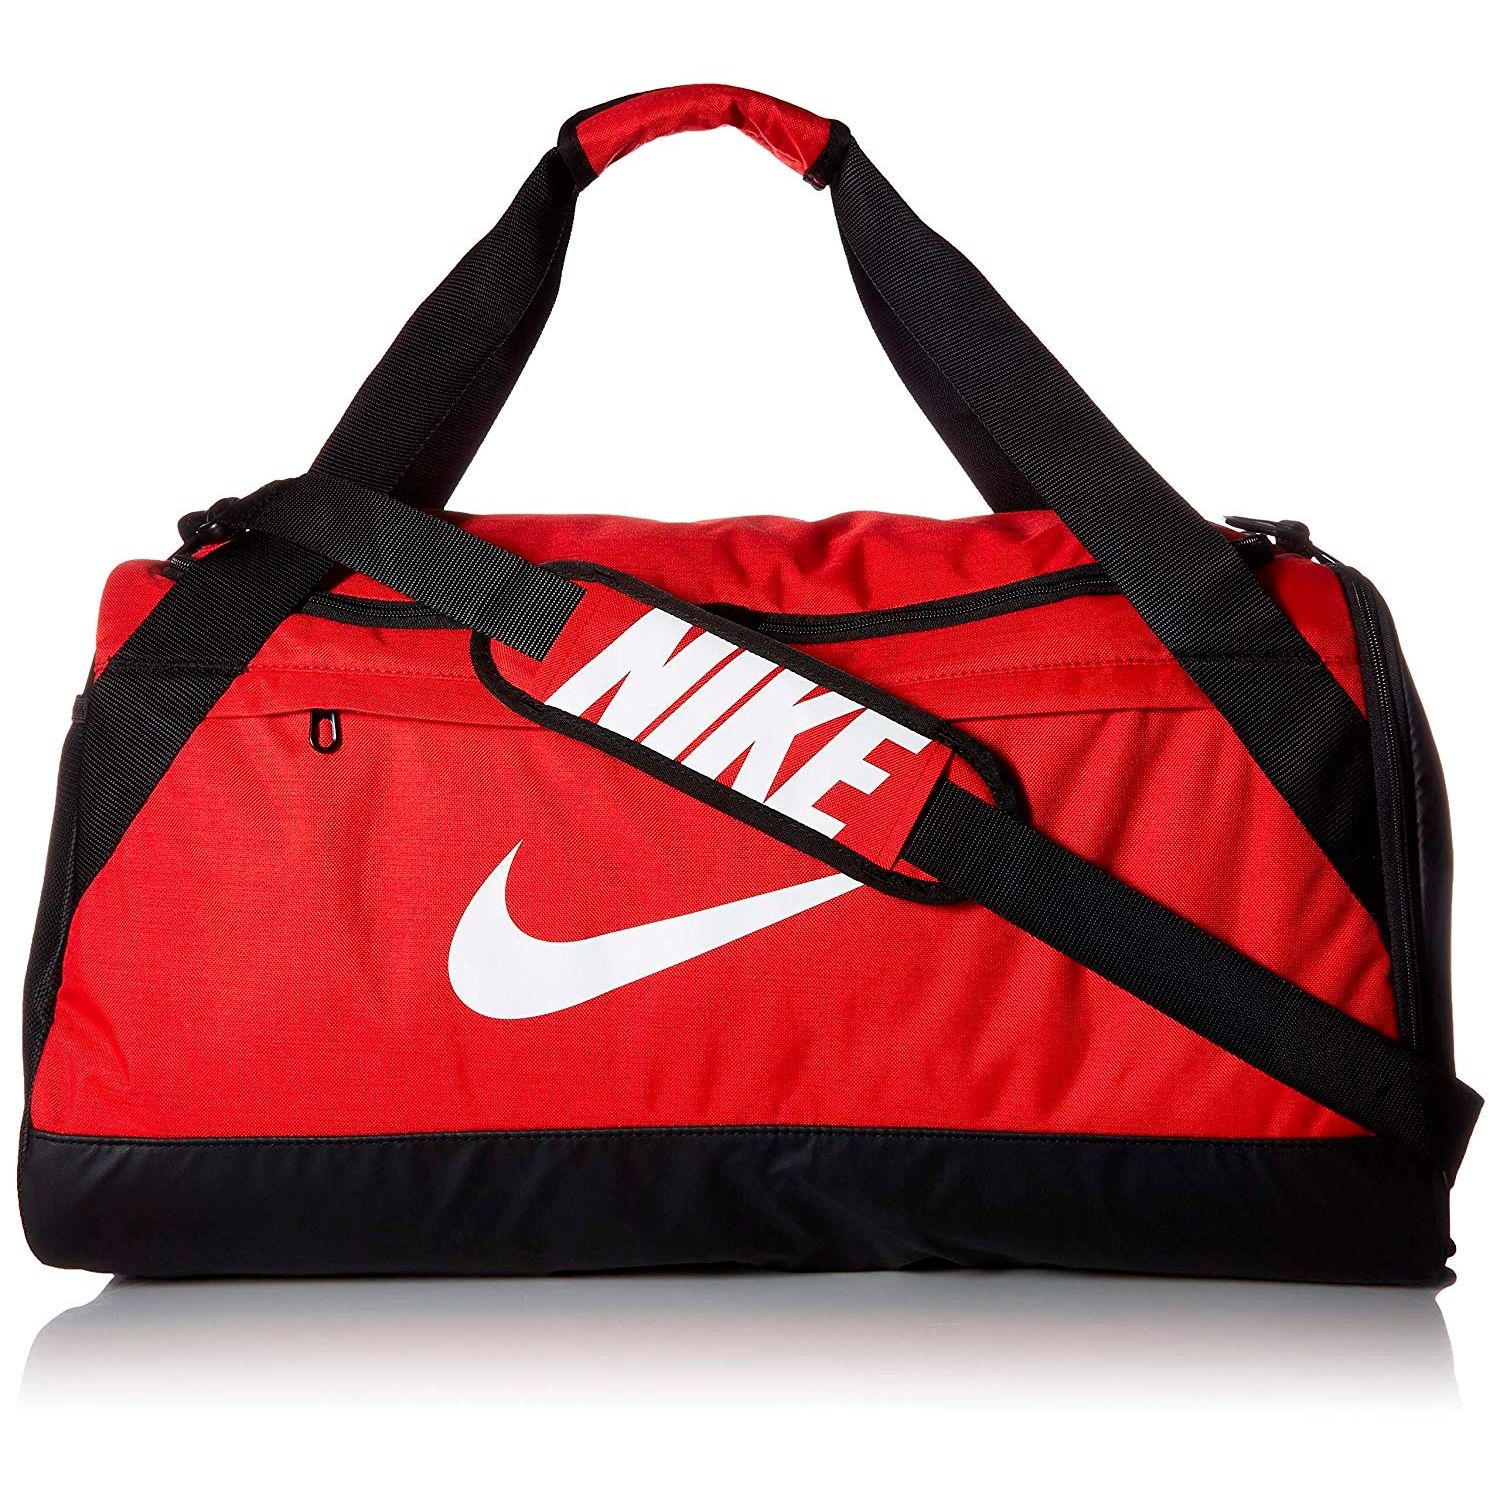 Bolso Deportivo Nike Hombre Top Sellers, 55% OFF |